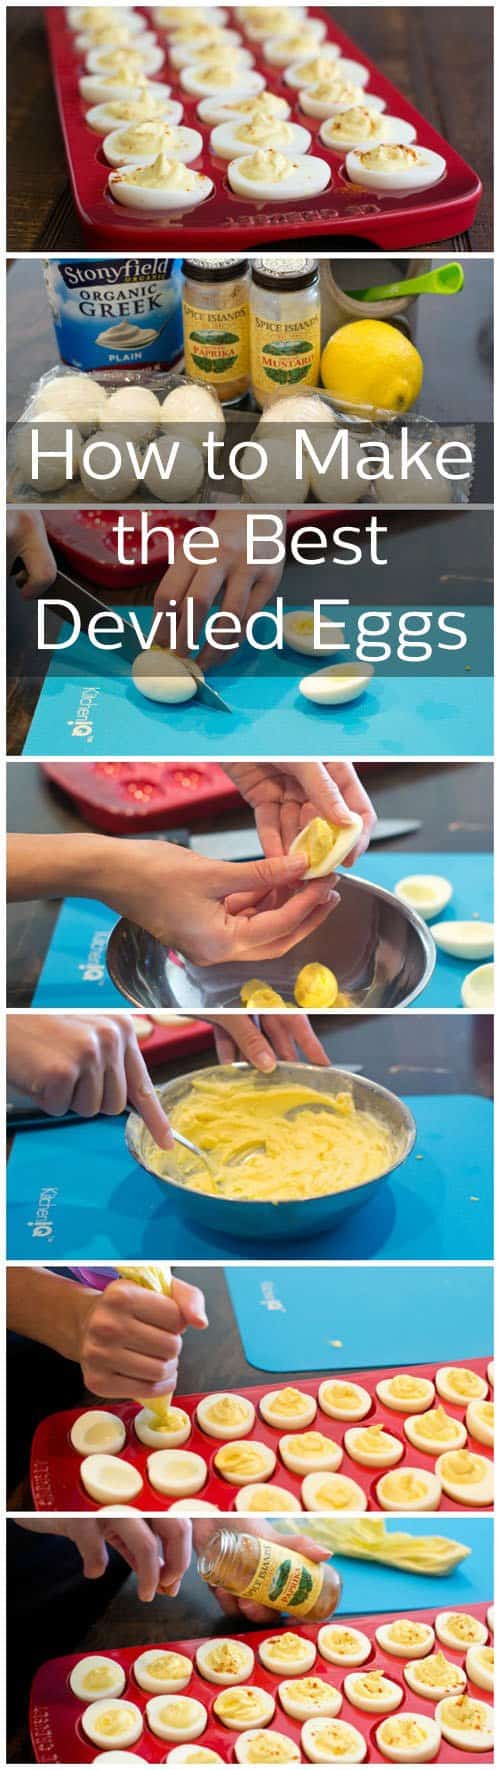 Collage of images of preparing deviled eggs. Test reads How to Make the Best Deviled Eggs.